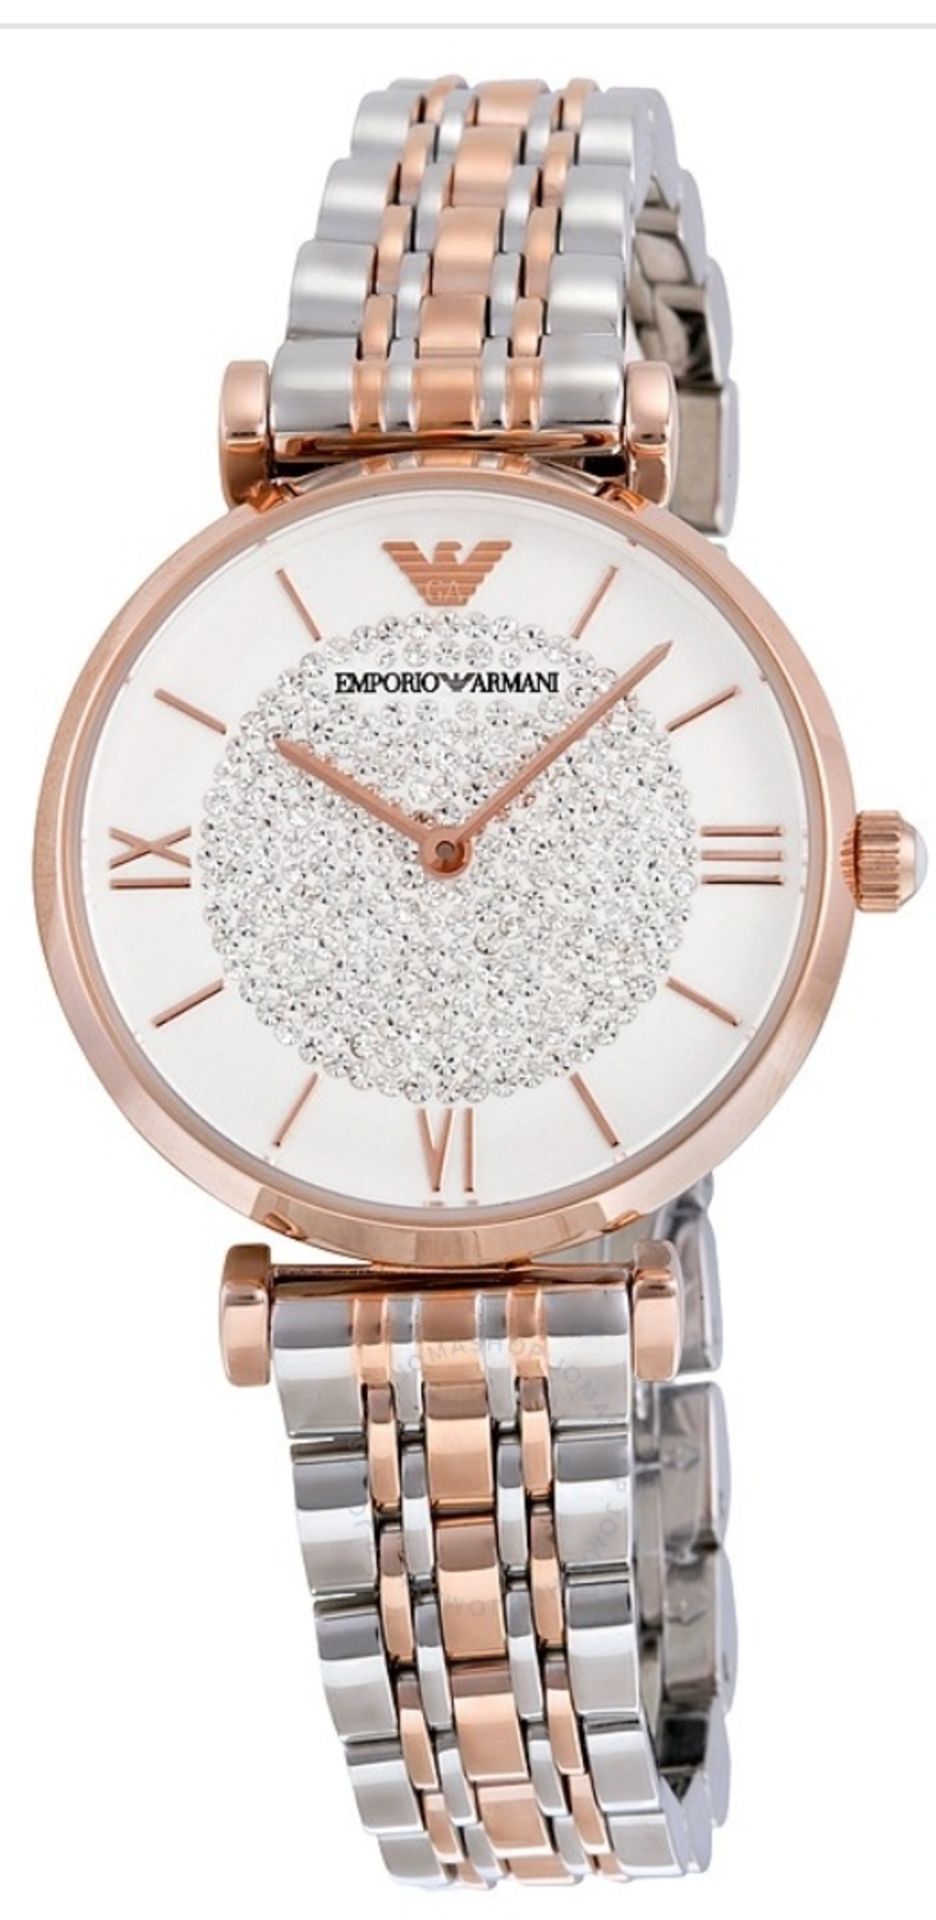 Ladies Gold and Silver Two Tone Stainless Steel Emporio Armani Watch AR1926 - Image 4 of 7